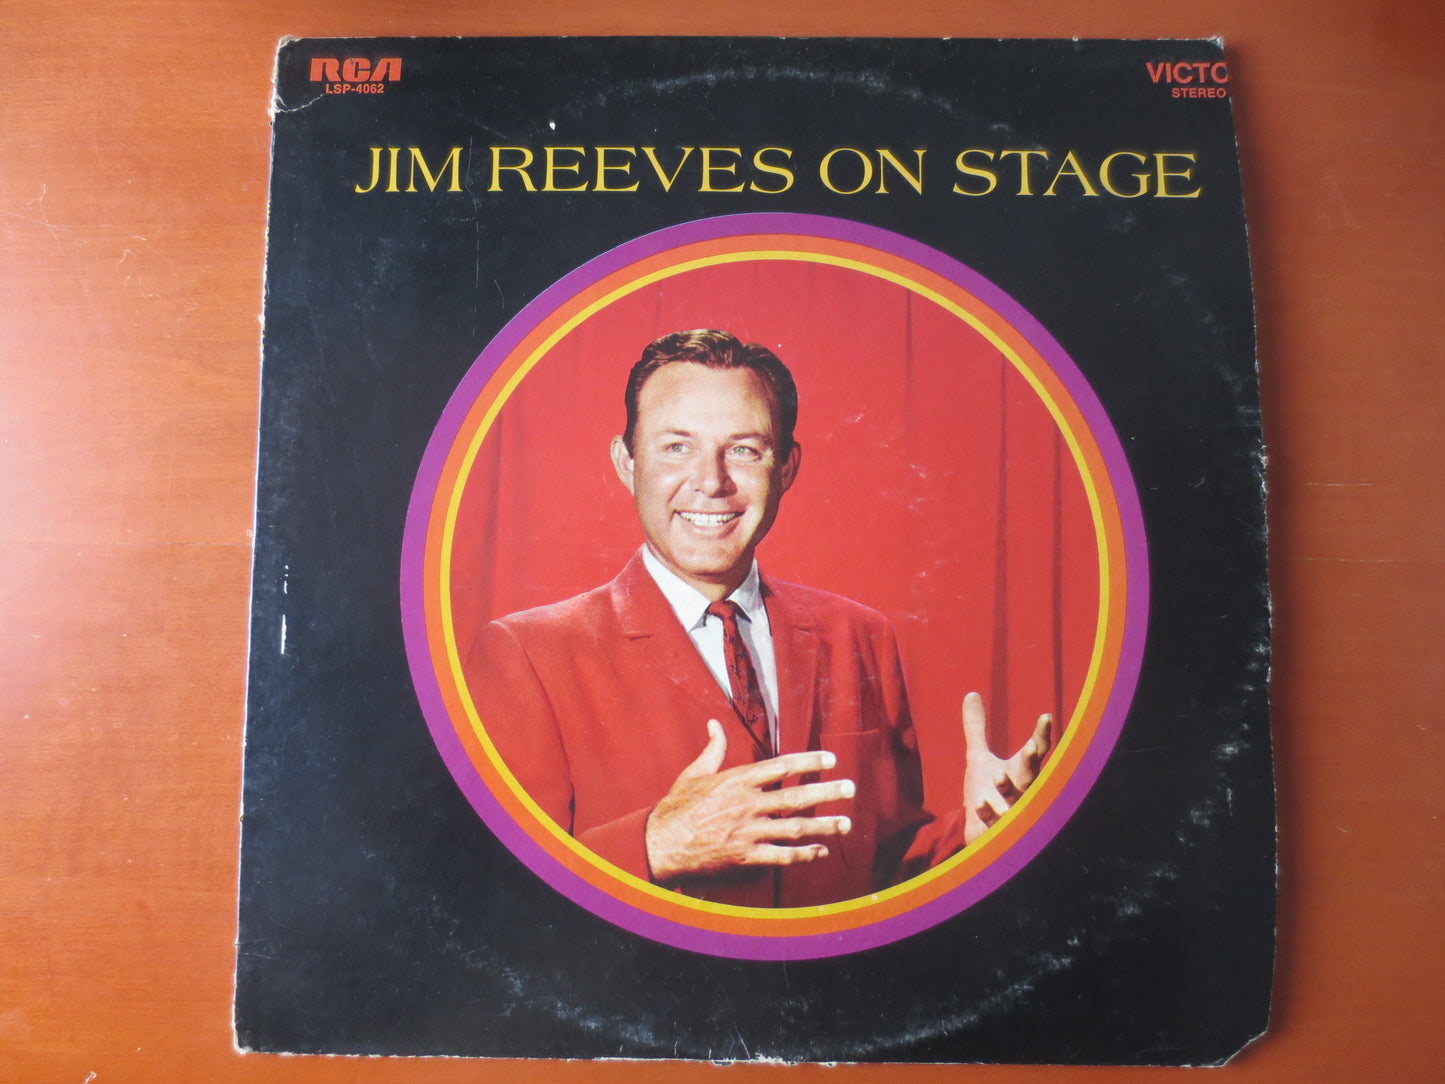 JIM REEVES, On STAGE, Jim Reeves Albums, Jim Reeves Records, Country Albums, Country Records, Vinyl Records, 1968 Records